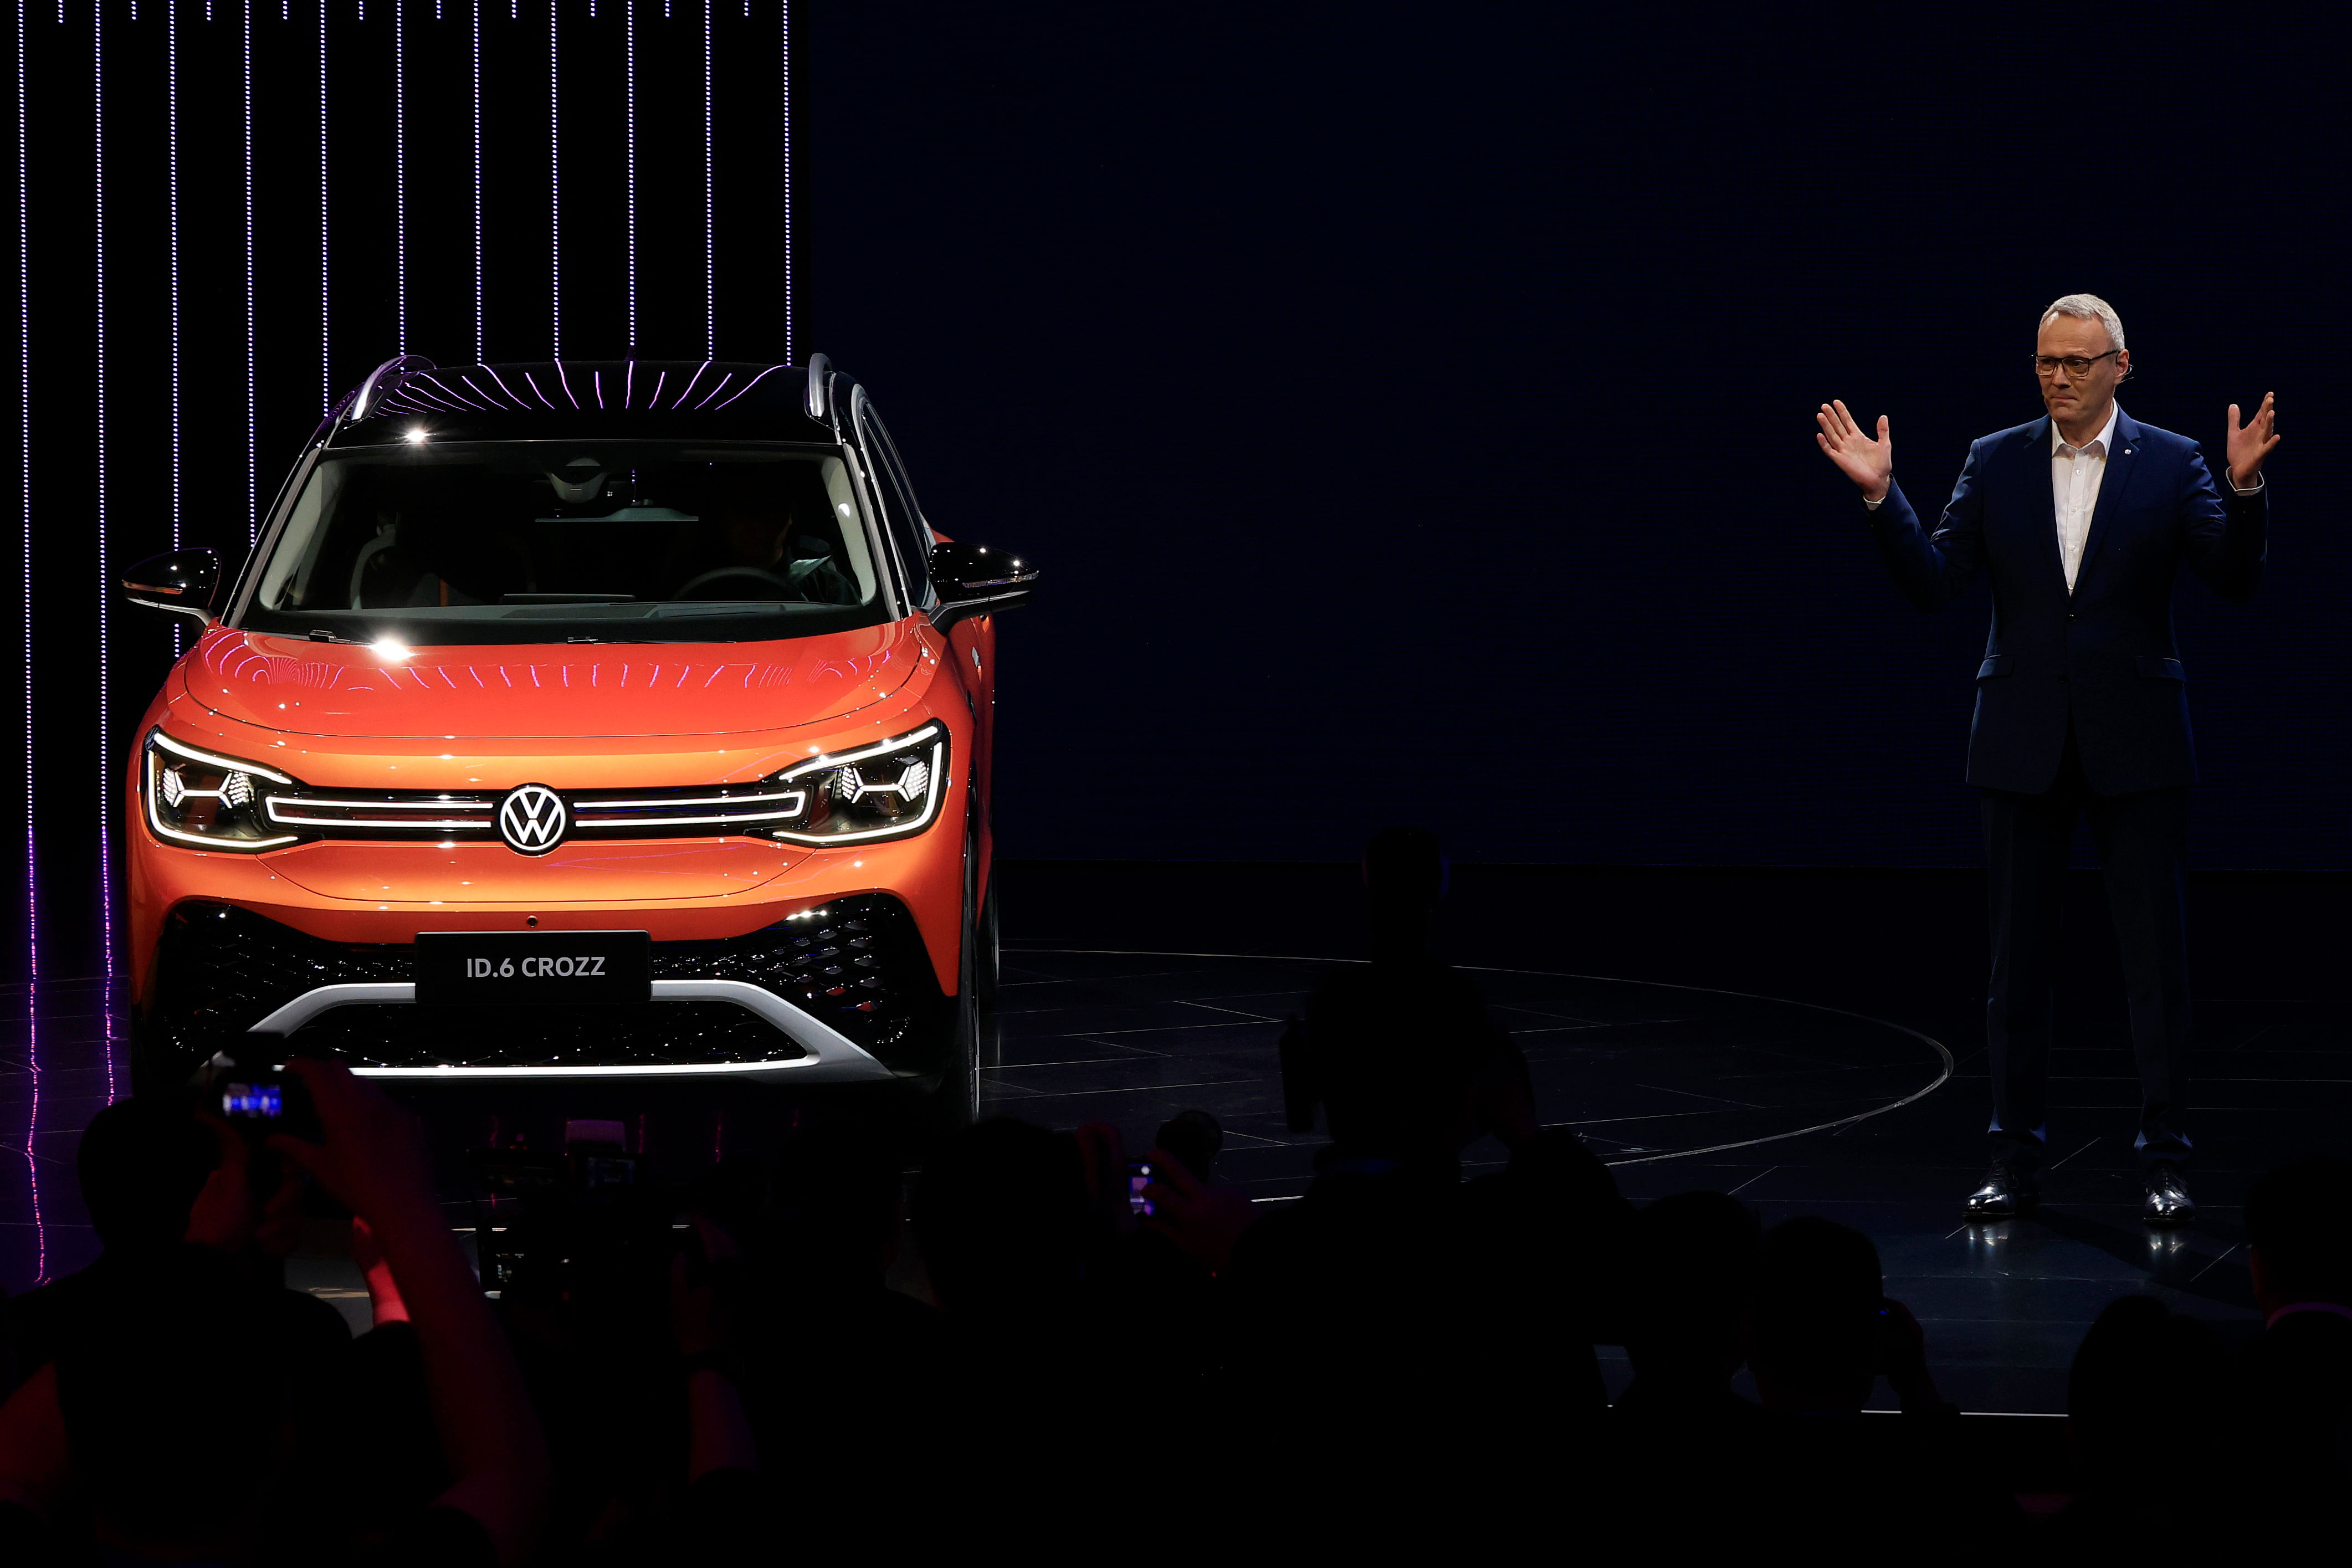 Stephan Wollenstein, CEO of Volkswagen Group China, introduces the ID 6 electric SUV at the Shanghai Auto Show in Shanghai on Monday. Credit: AP/ PTI Photo